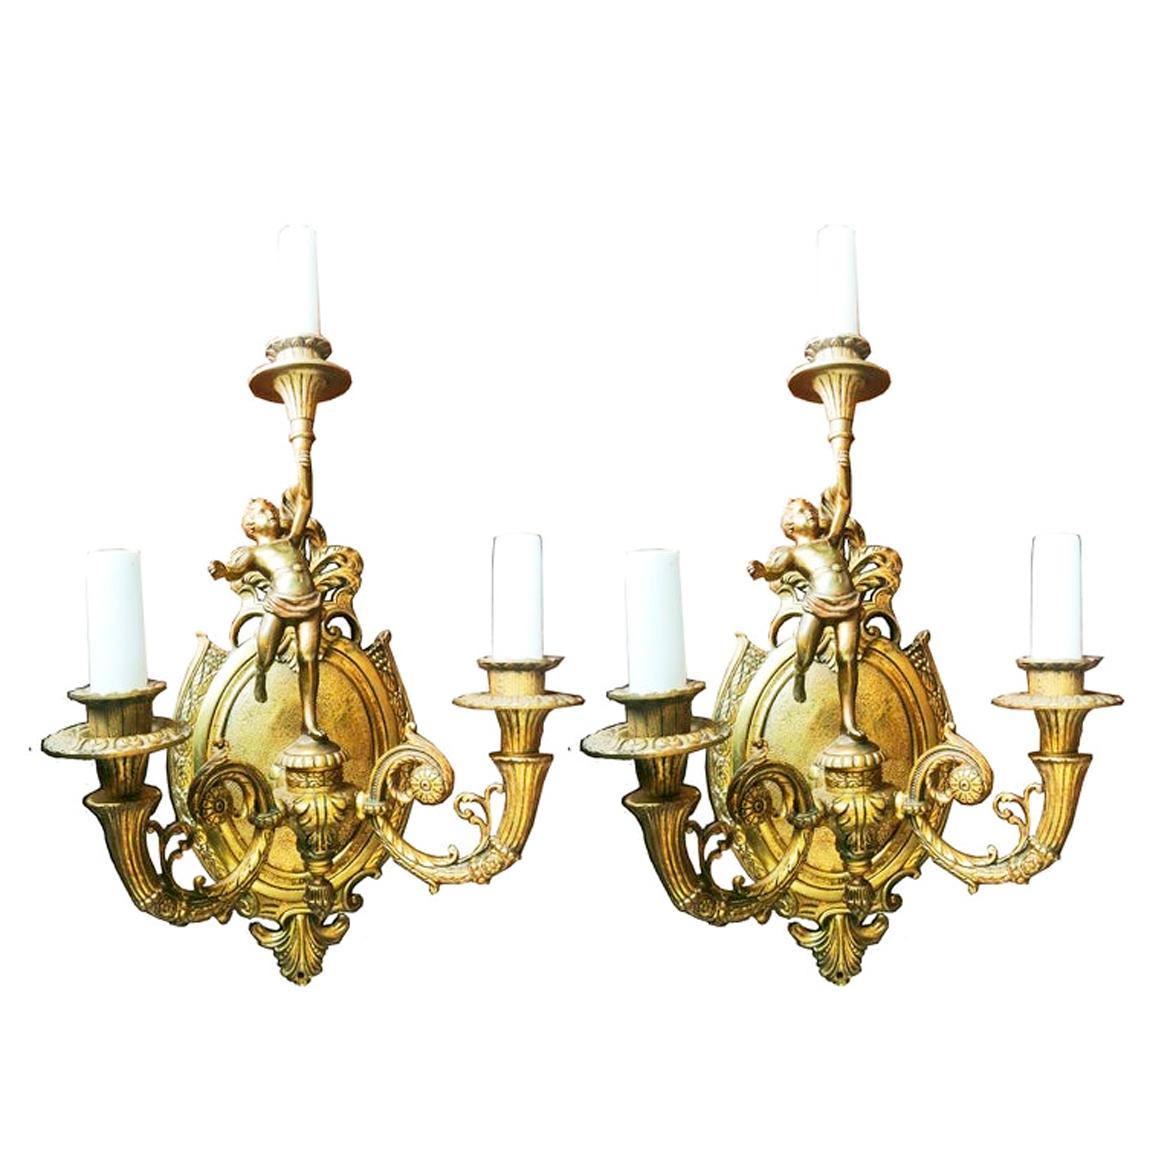  Wall Sconces French Empire Style Whit Cherub Putti Carrying Torch, Bronze, Pair For Sale 3